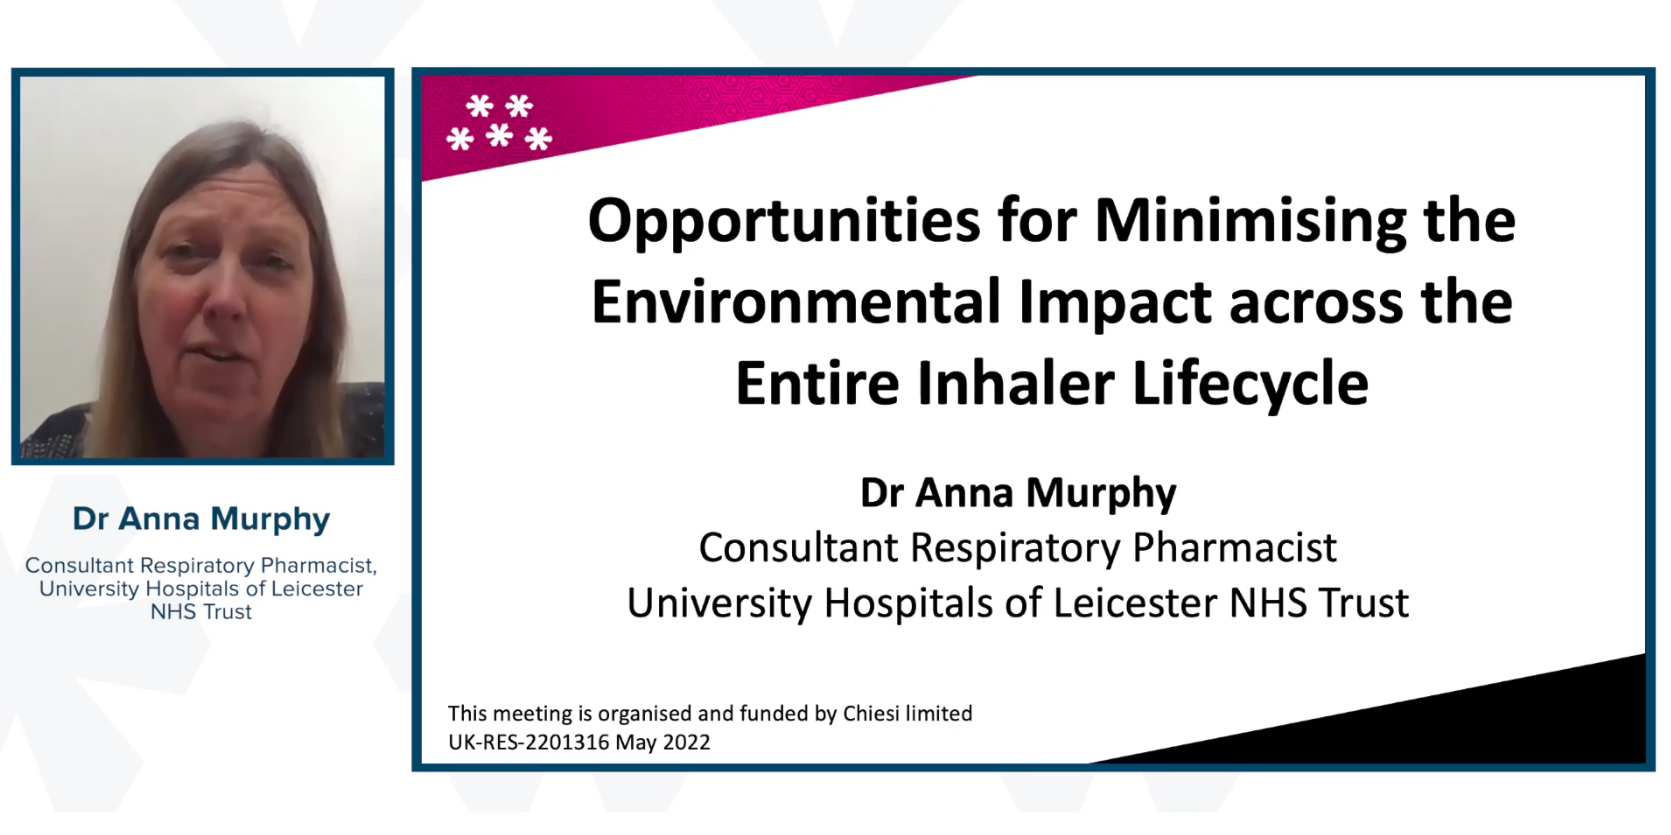 Minimising Environmental Impact Across the Entire Inhaler Lifecycle